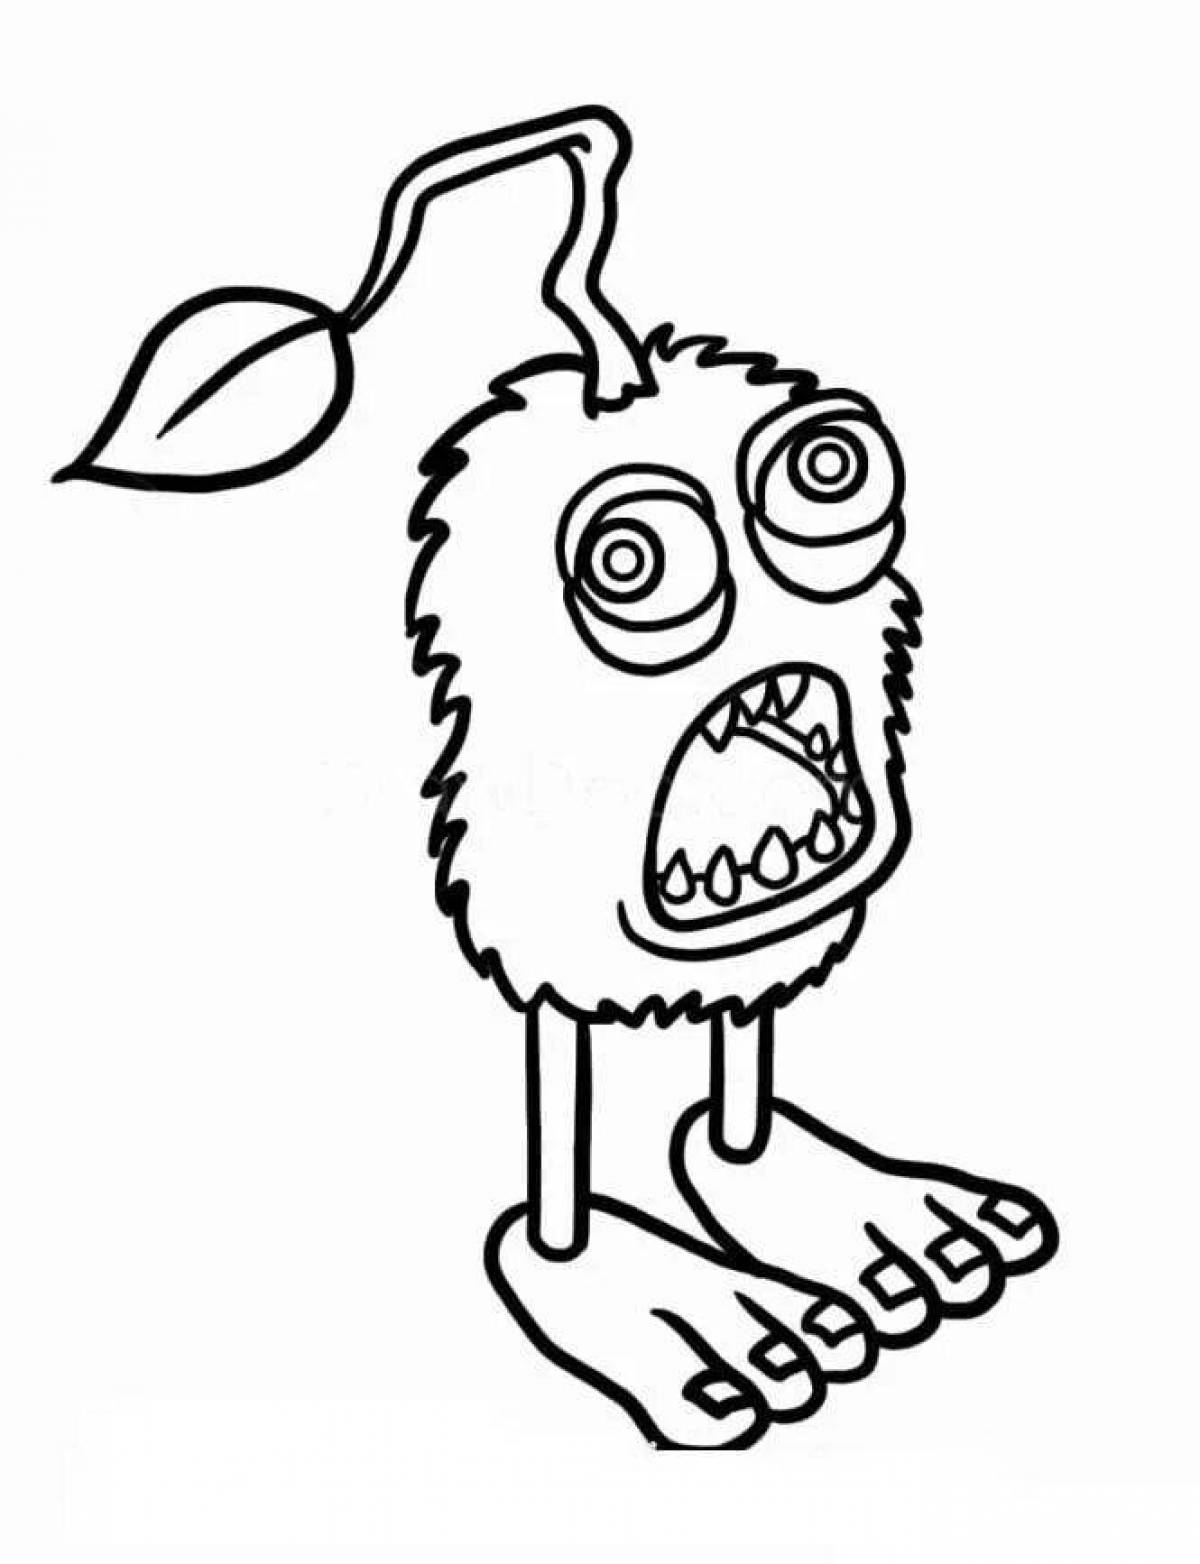 Coloring page happy may singing monster